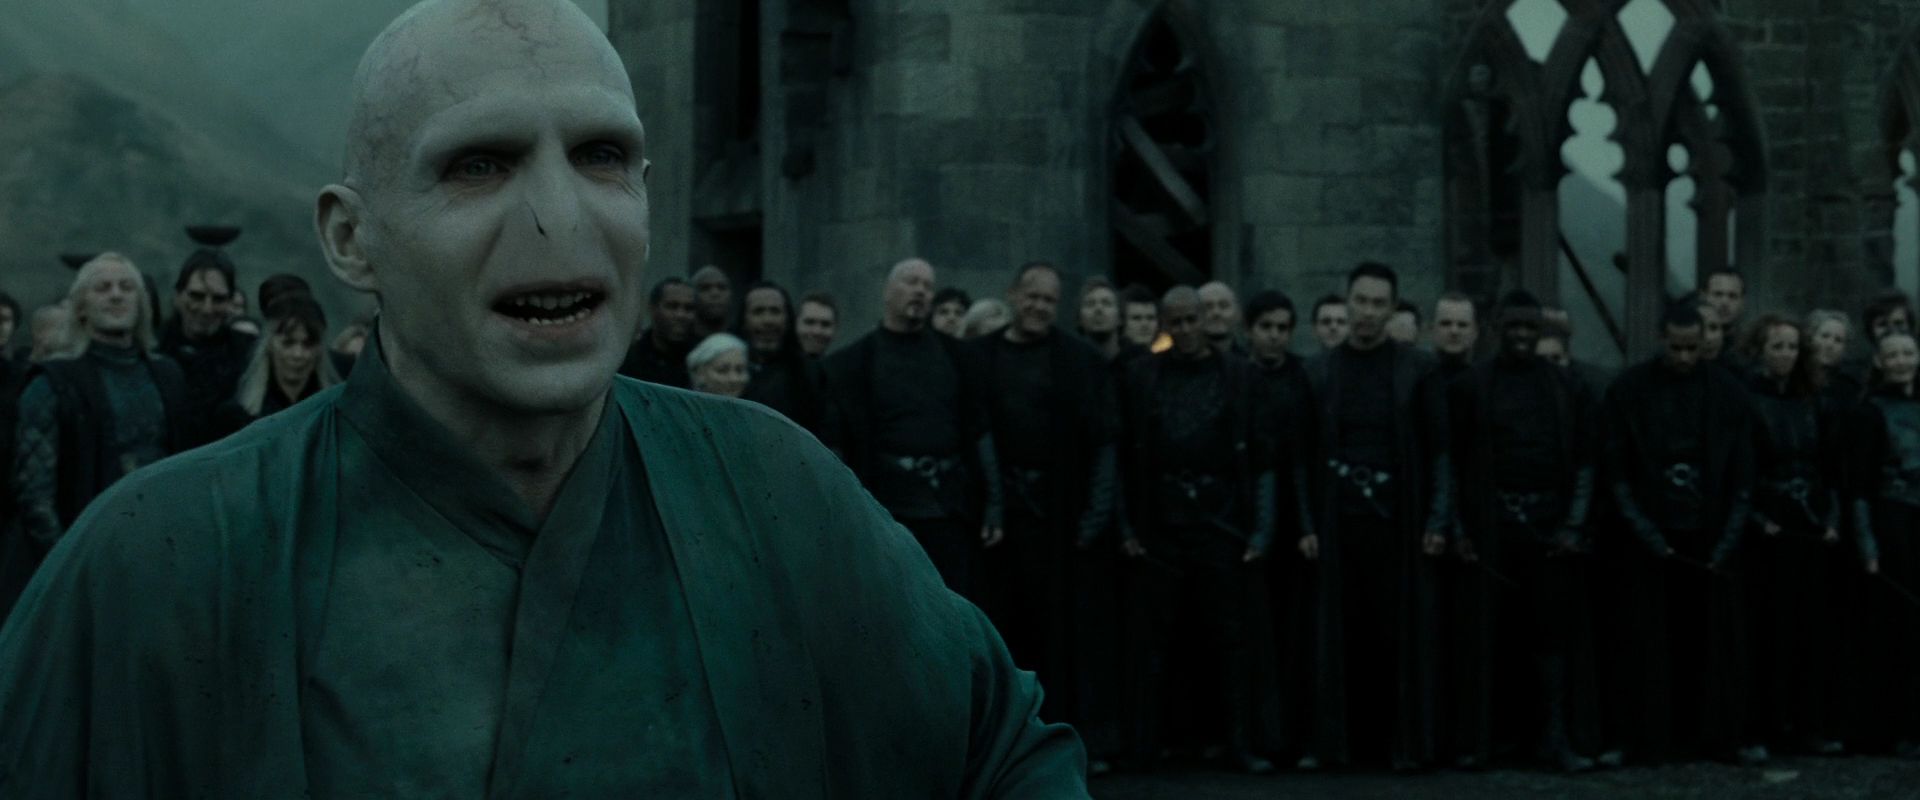 Lord Voldemort images HP DH part 2 wallpaper photos 26625084